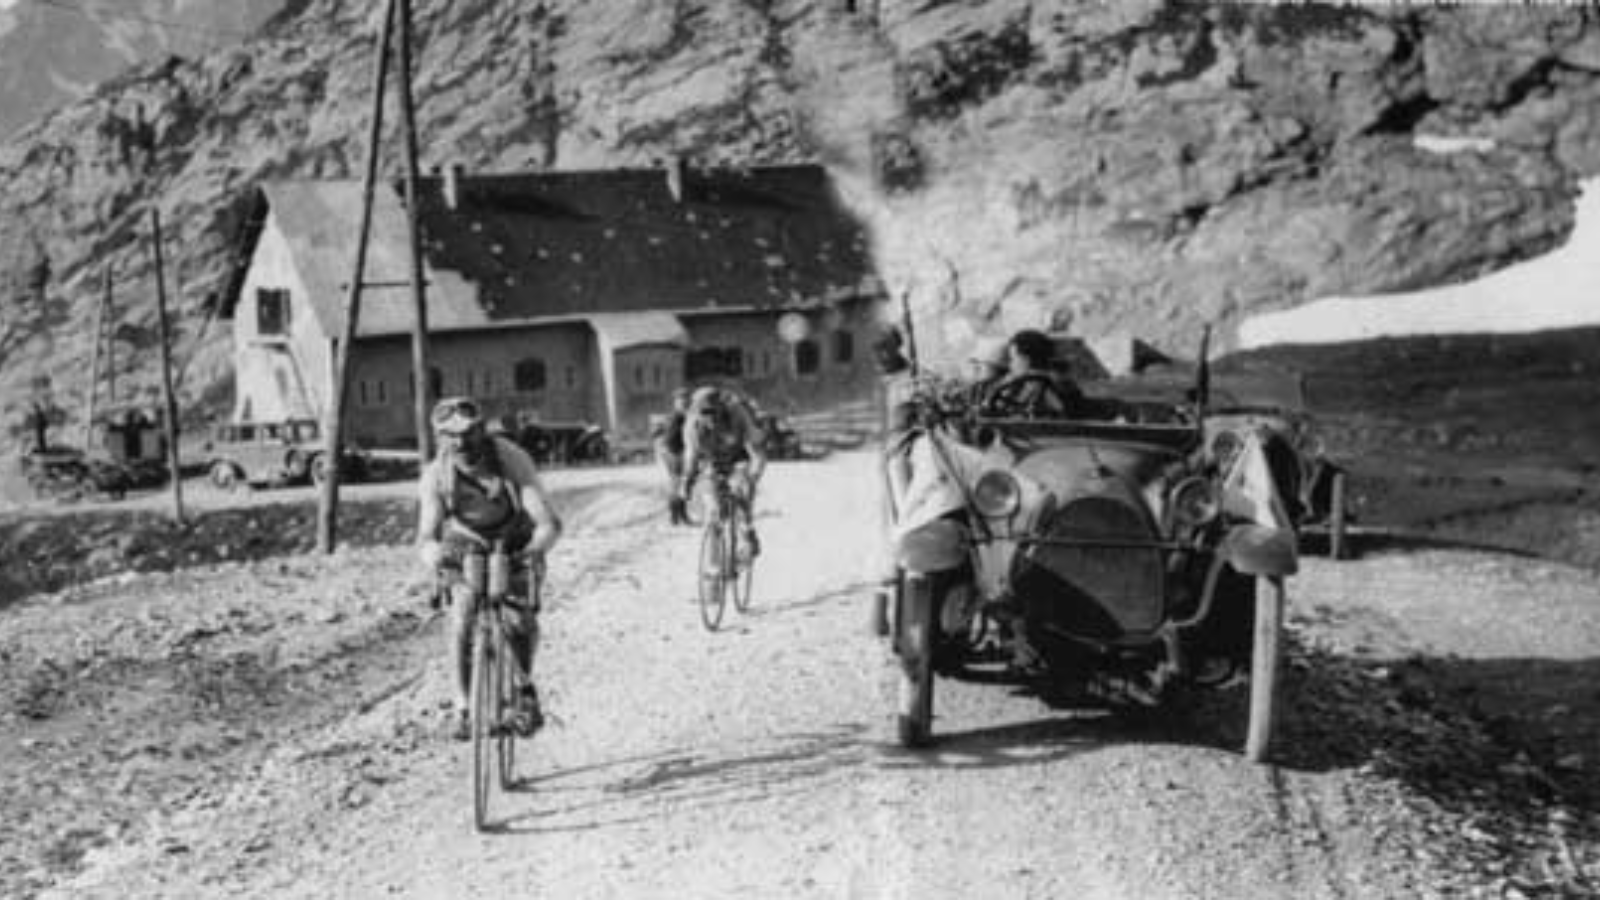 Tour de Framce 1920 stage in the Alps